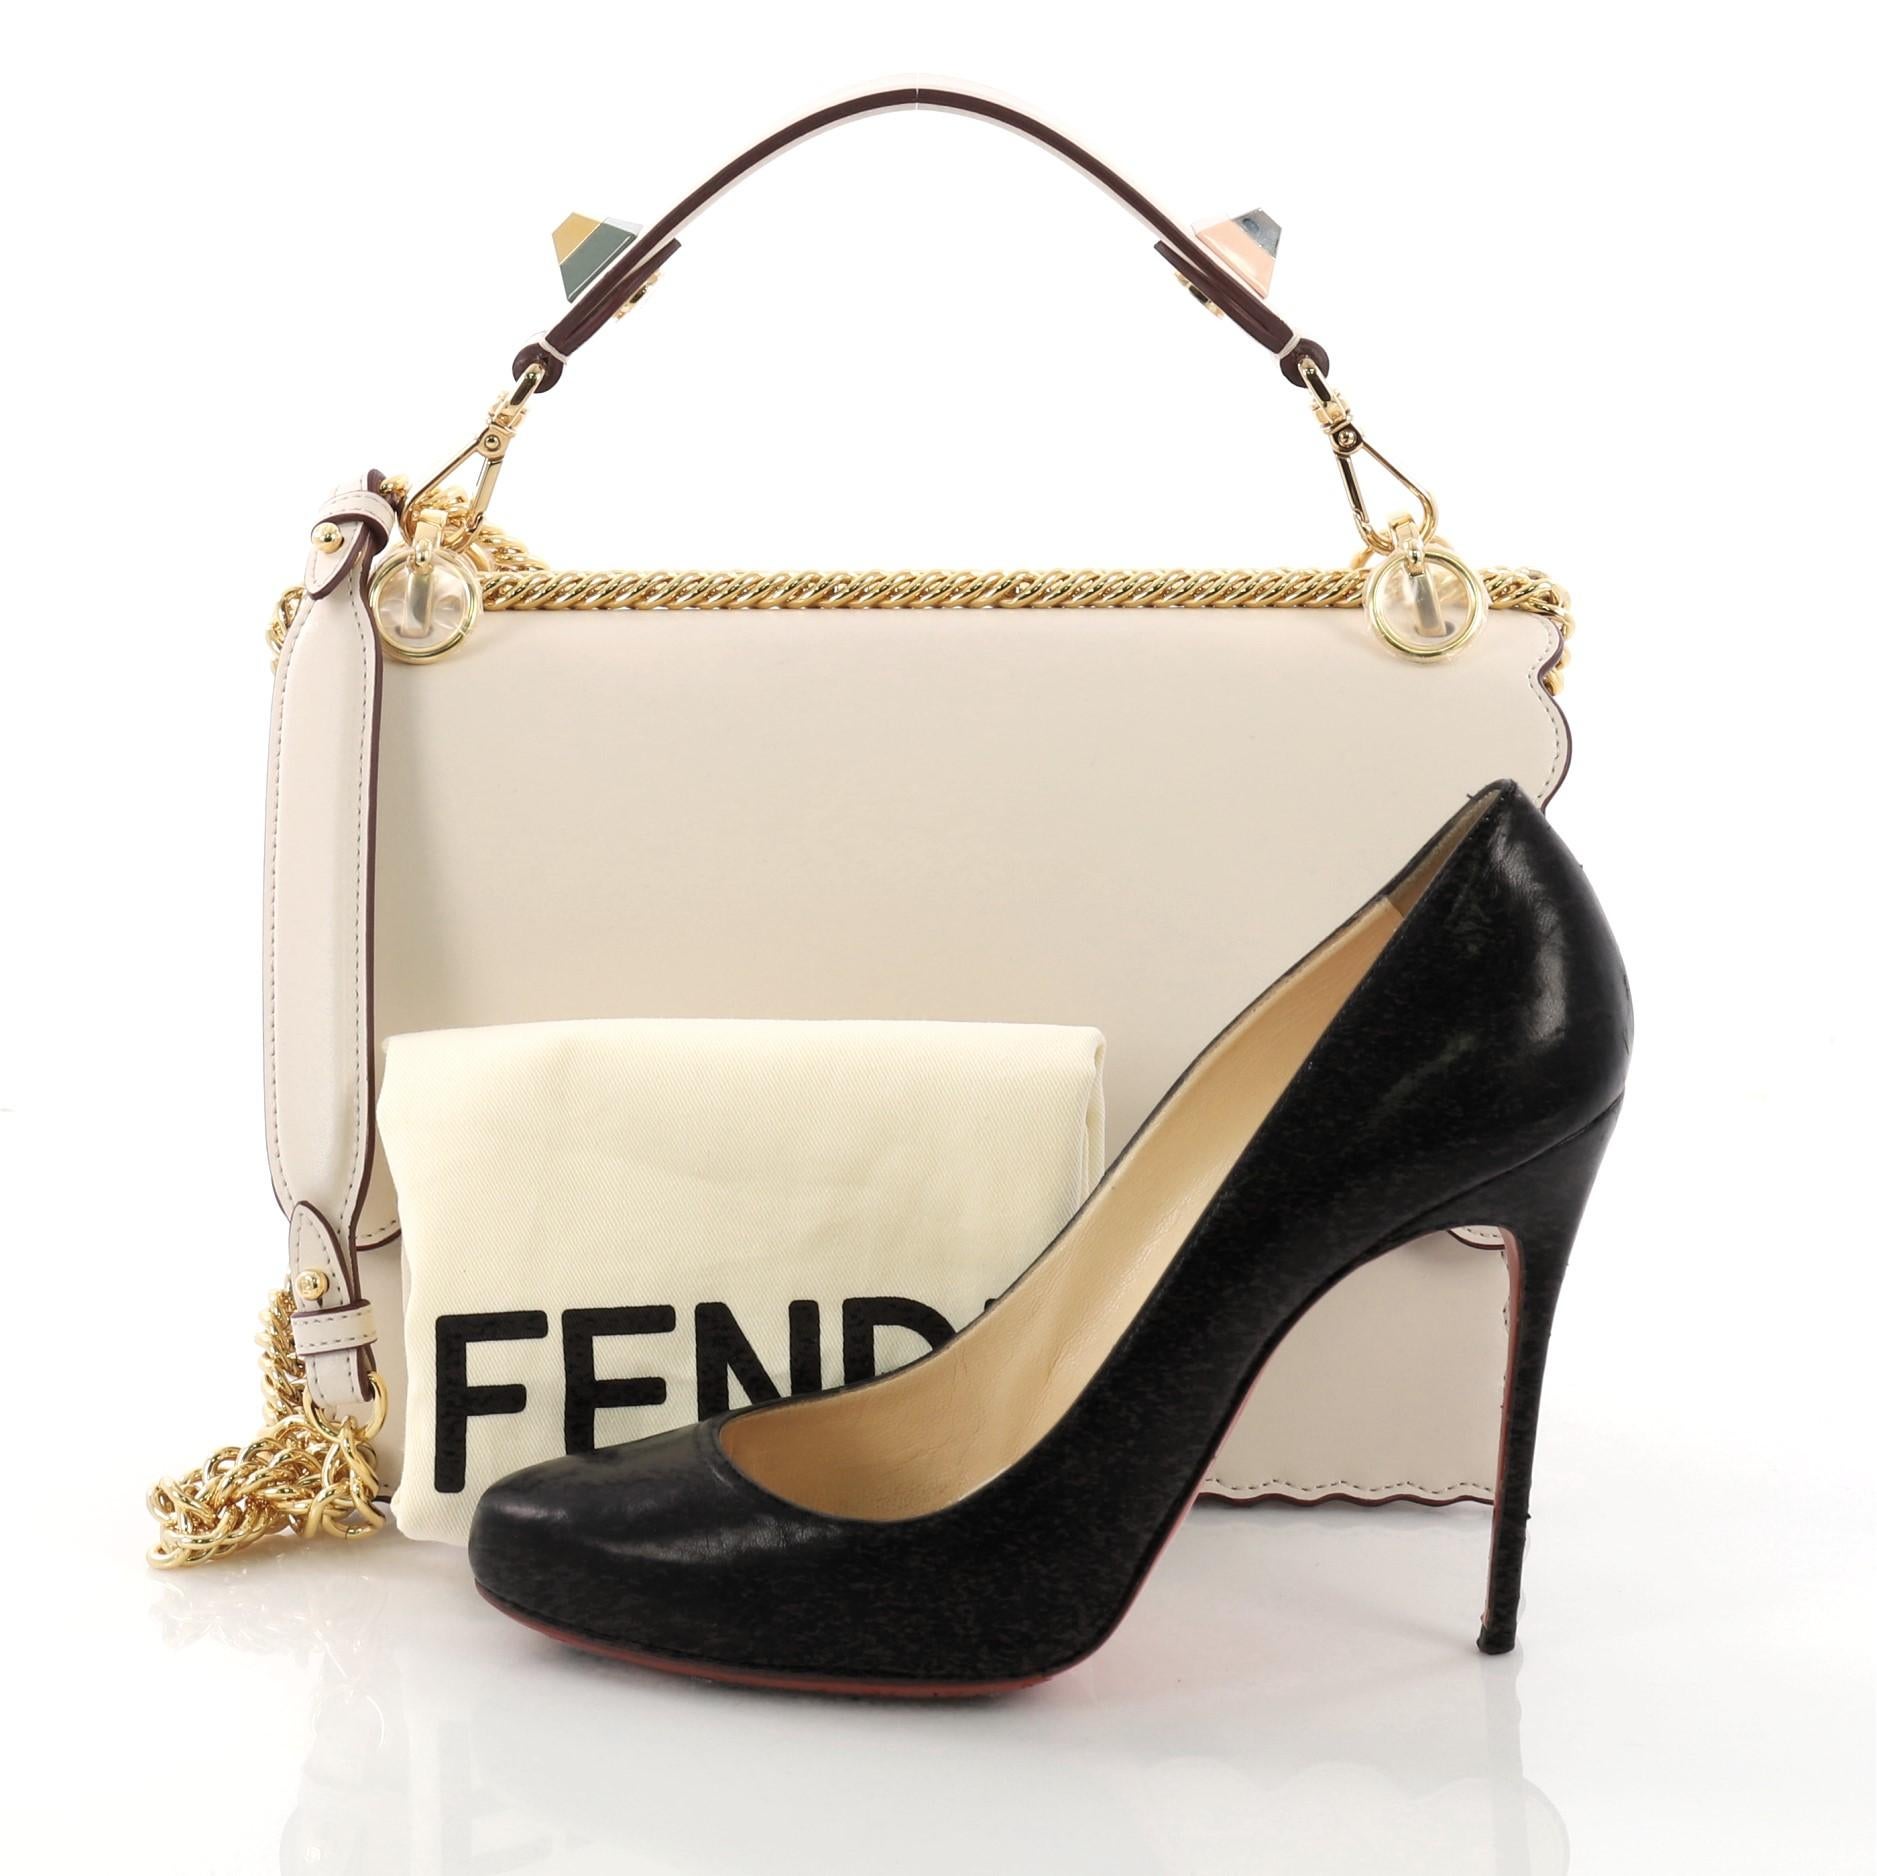 This Fendi Kan I Handbag Leather Medium, crafted from white leather with scalloped trims, features flat top handle with ABS studs, long sliding chain-link shoulder strap with leather insert, and gold-tone hardware. Its twist-lock closure opens to a